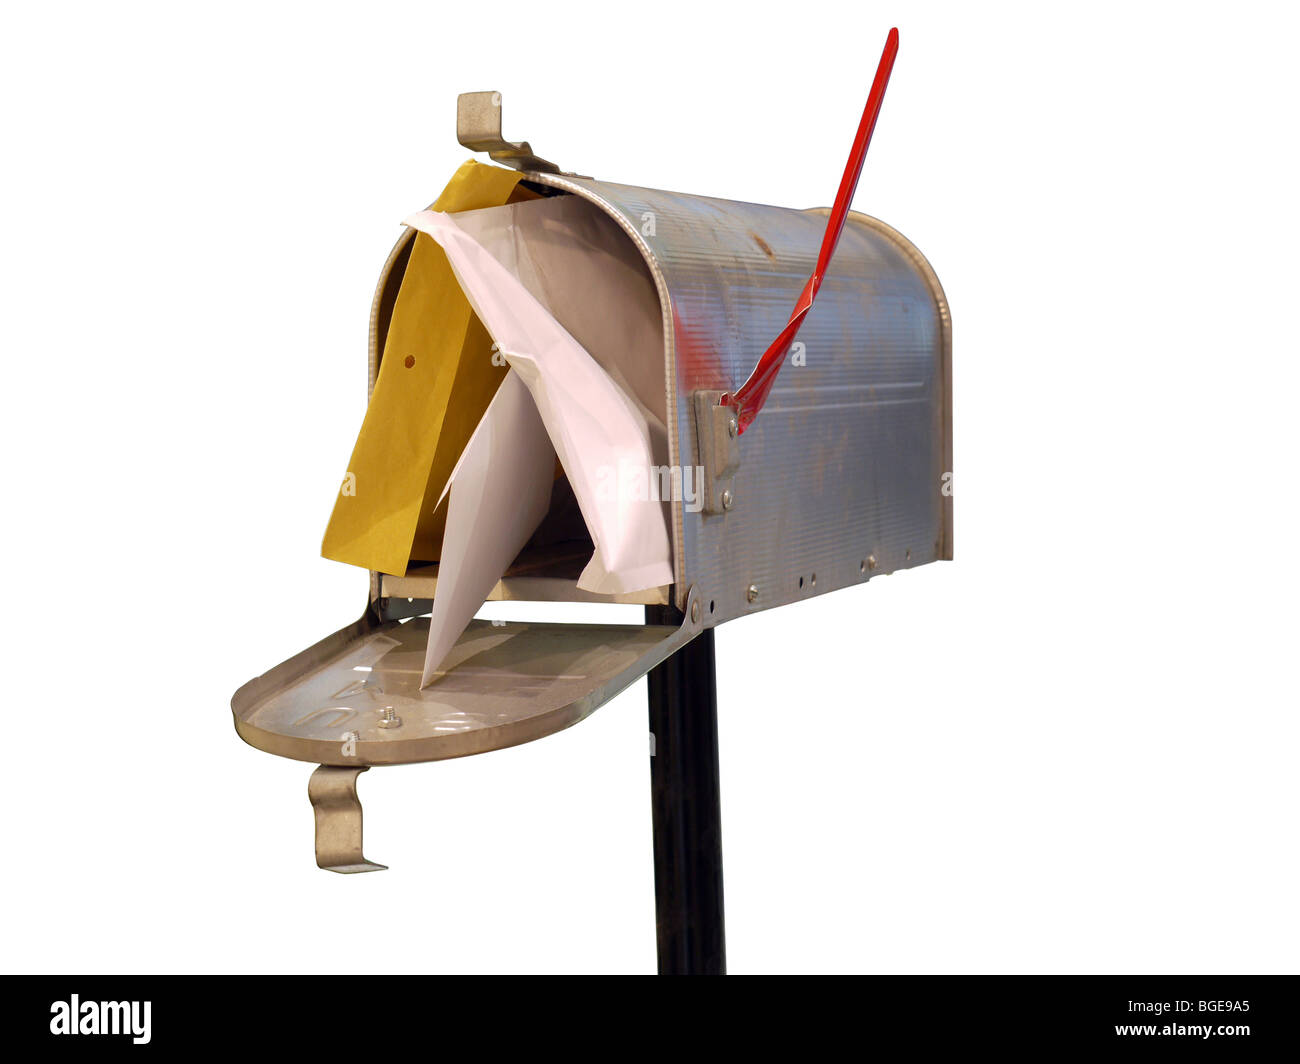 Classic American metal mailbox with red flag staffed with letters Stock Photo